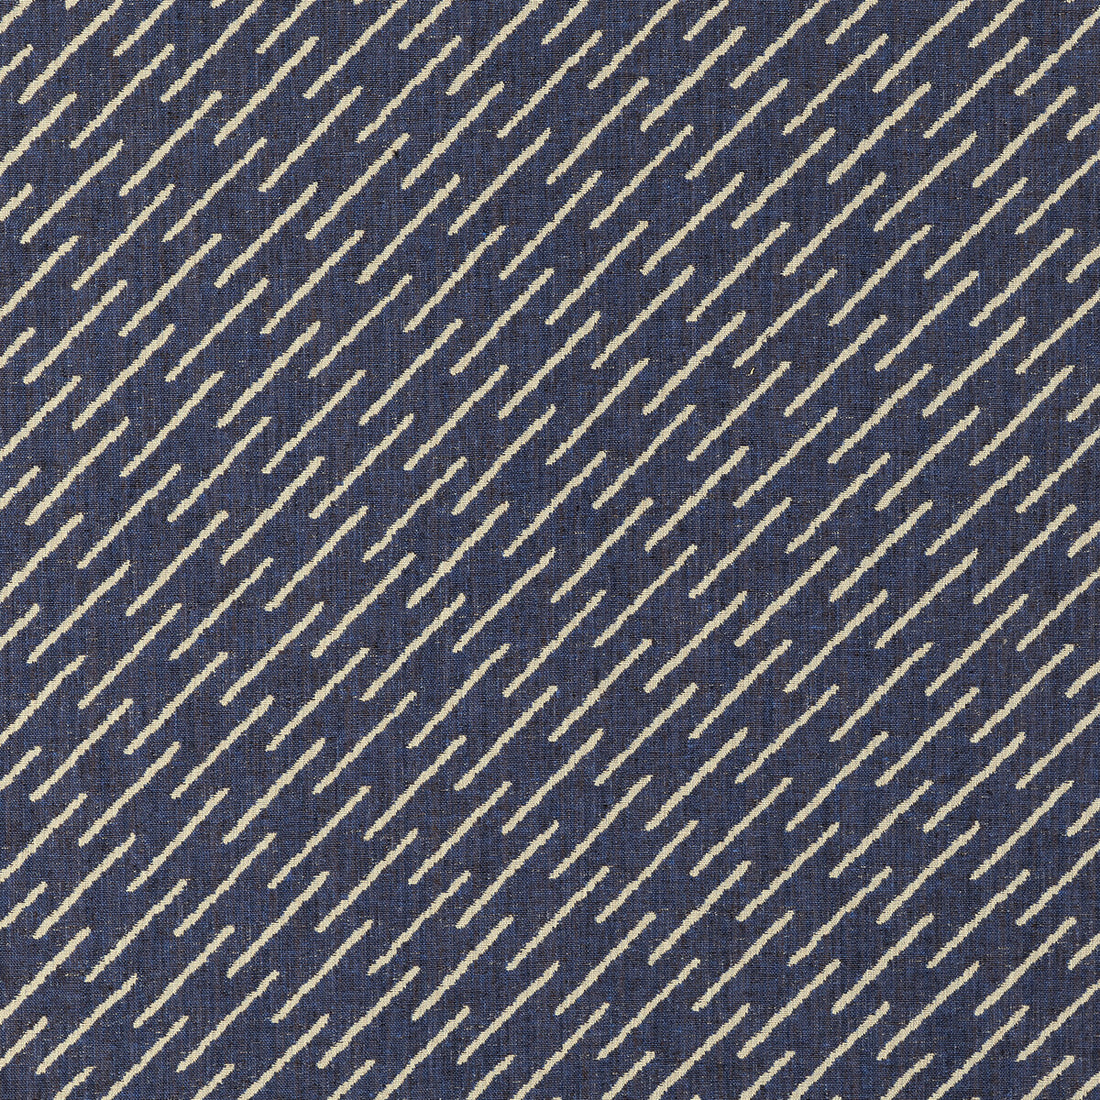 Esker Weave fabric in navy/cream color - pattern GWF-3759.501.0 - by Lee Jofa Modern in the Kelly Wearstler VI collection